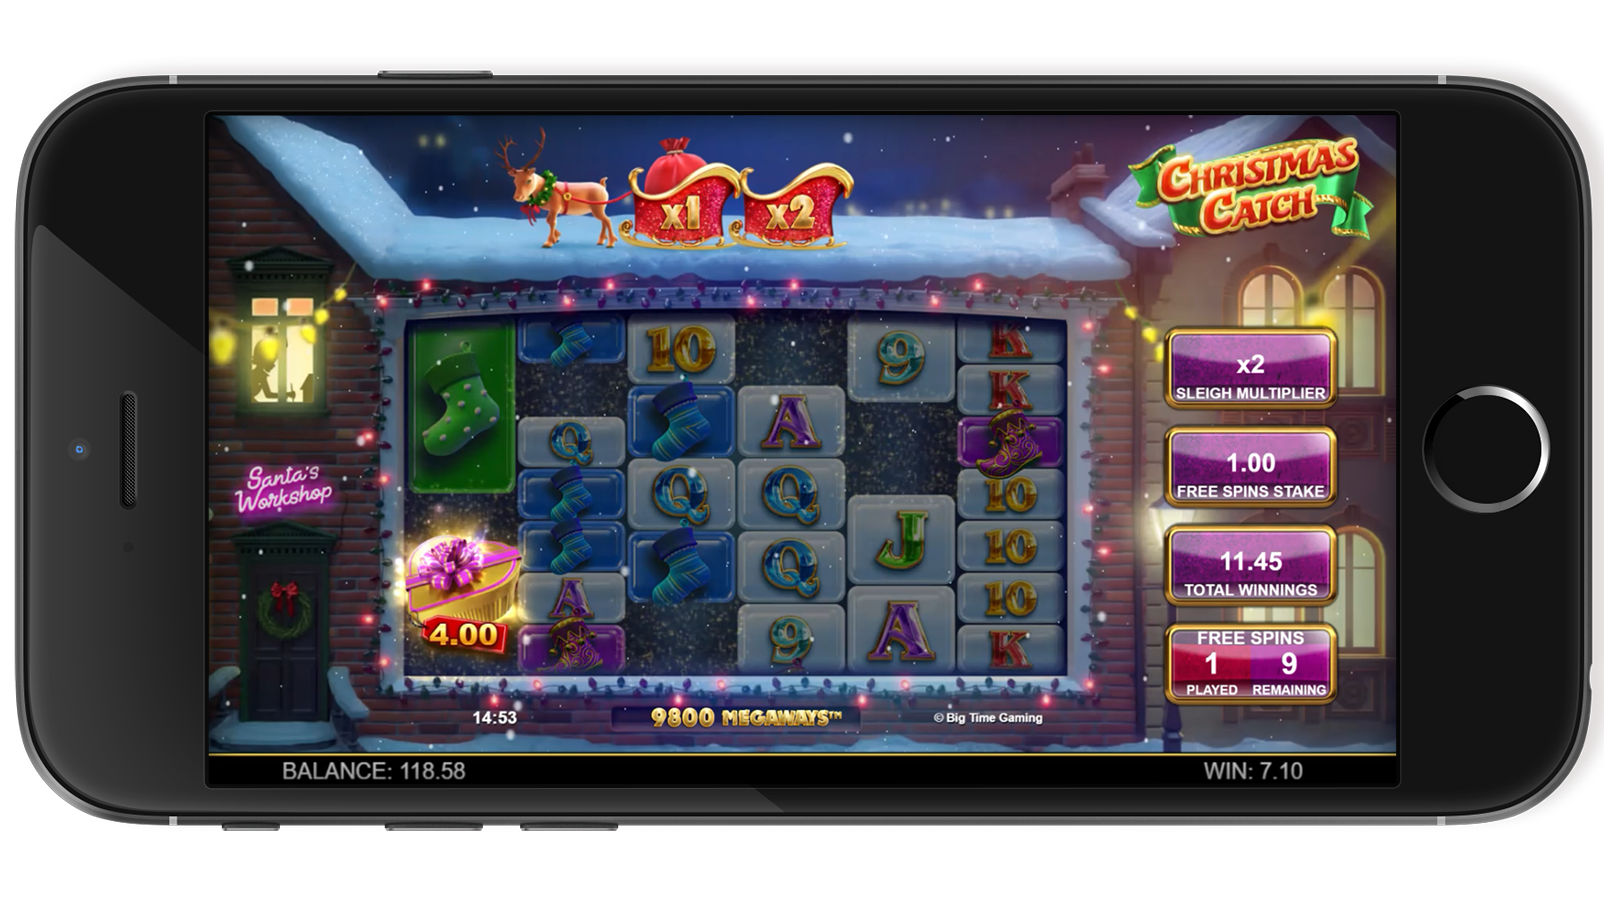 ChristmasCatch_FreeSpins_3_mobile.png